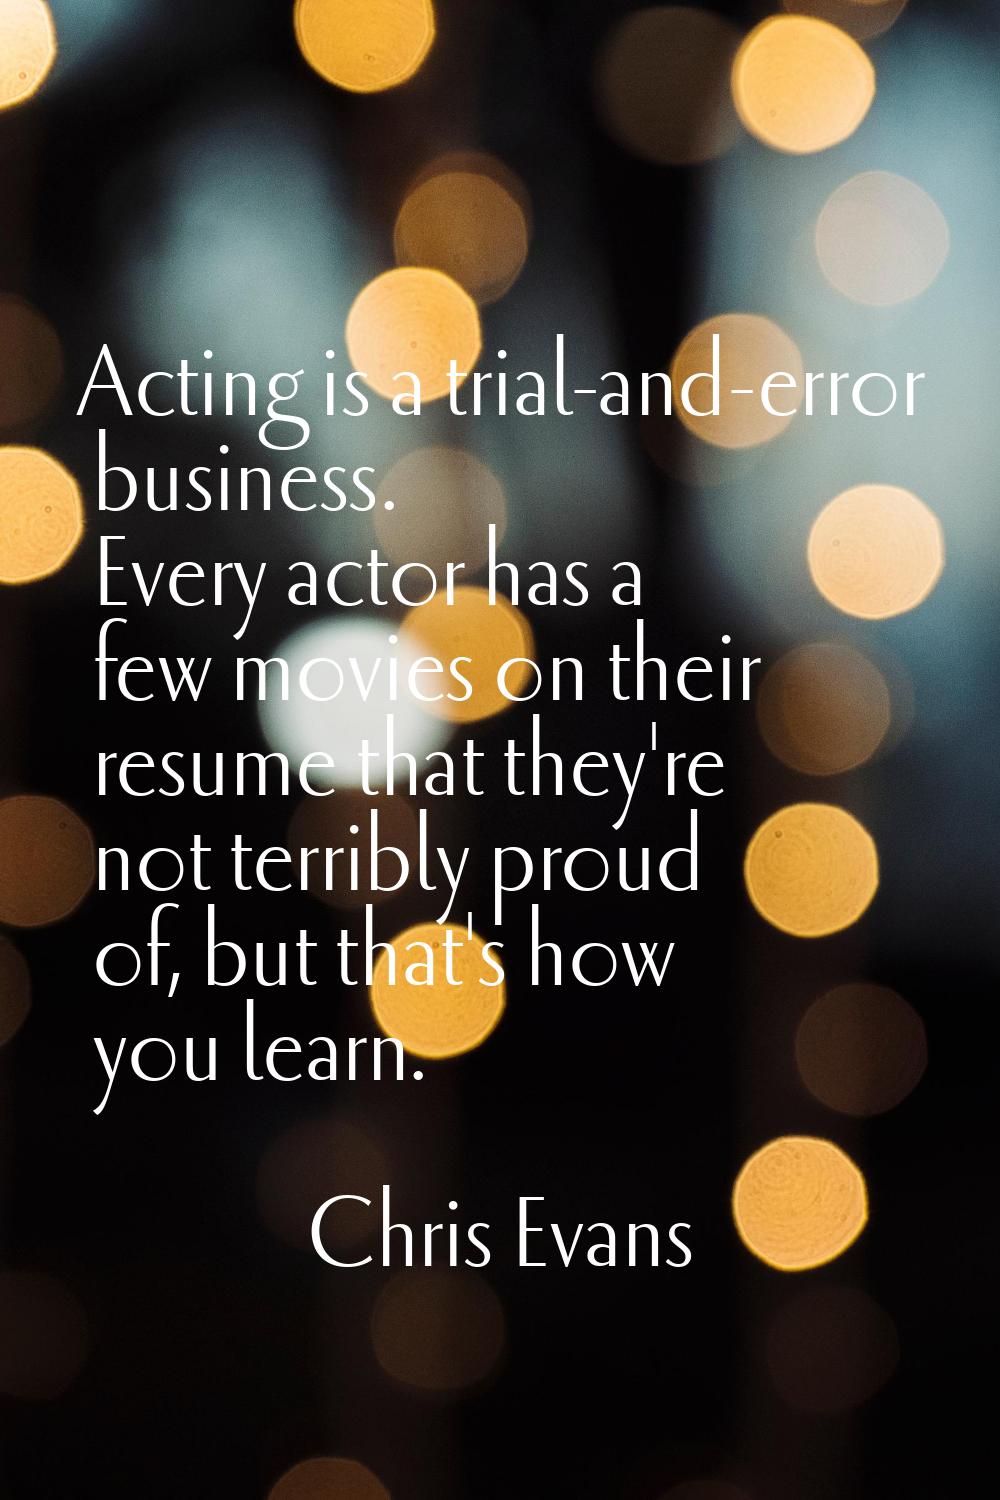 Acting is a trial-and-error business. Every actor has a few movies on their resume that they're not